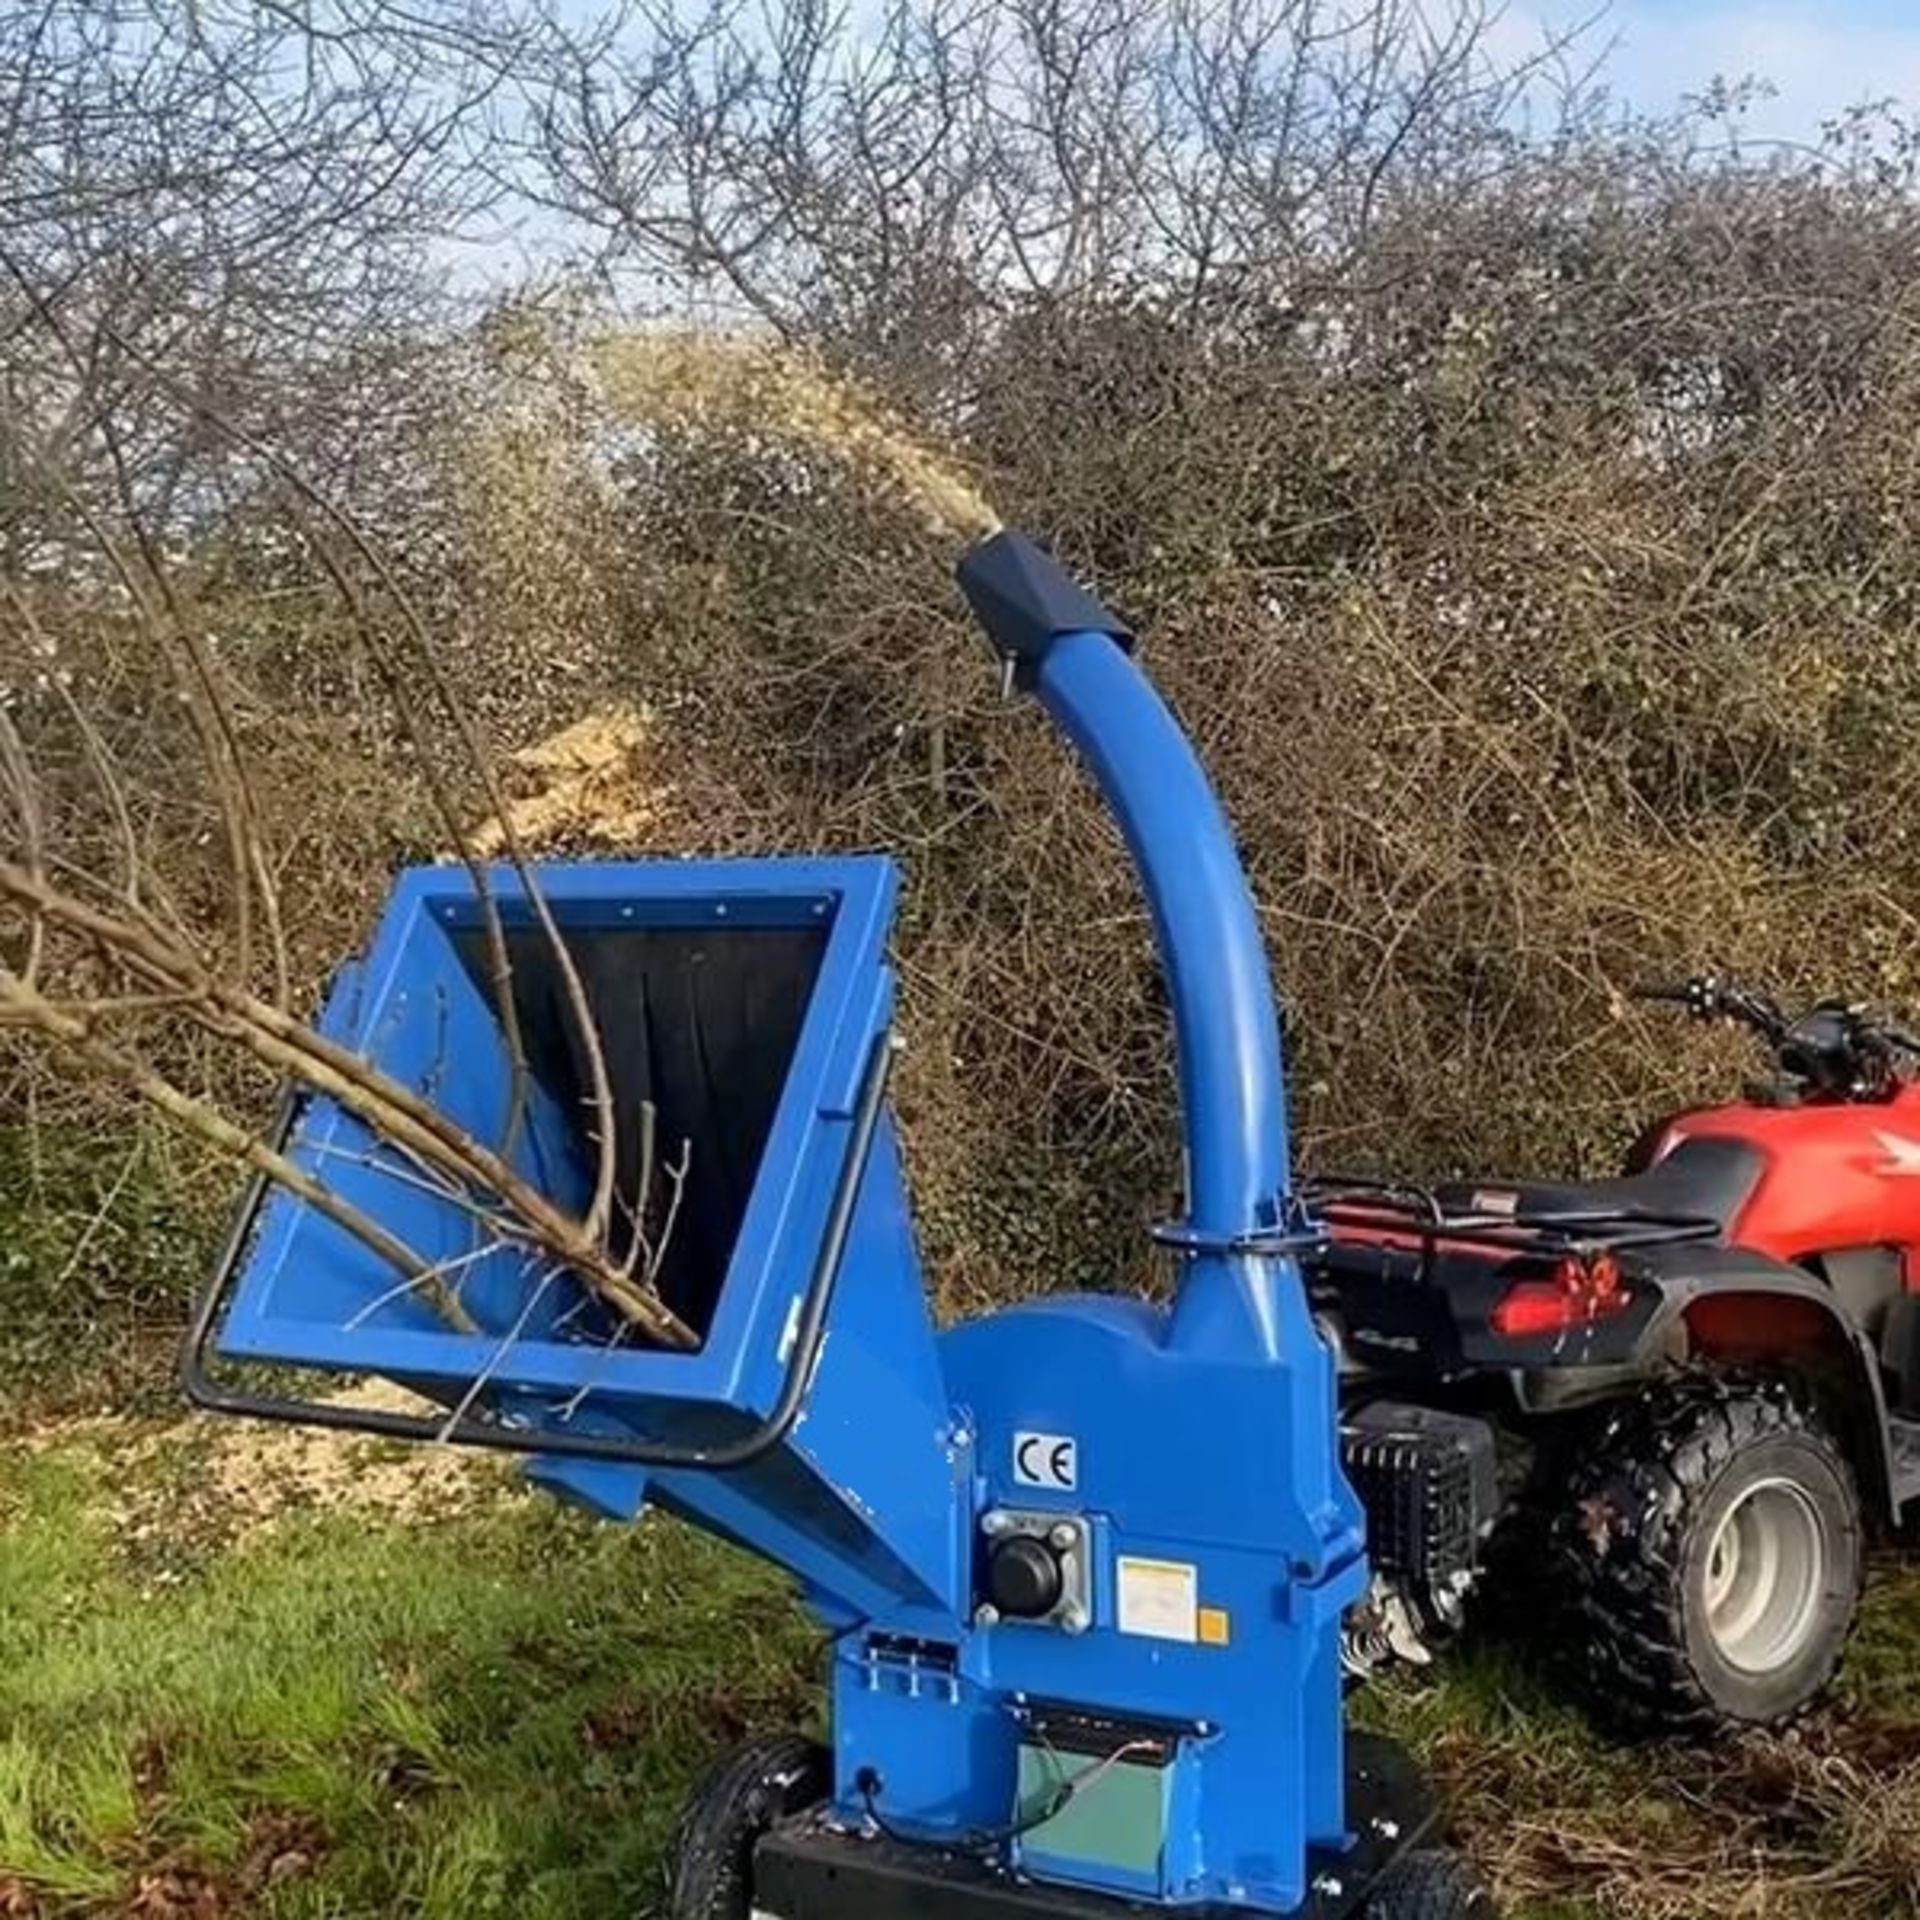 NEW AND UNUSED 15100TE 420cc 4.5" TOWABLE PETROL WOOD CHIPPER, RRP OVER £2400 *PLUS VAT* - Image 5 of 10